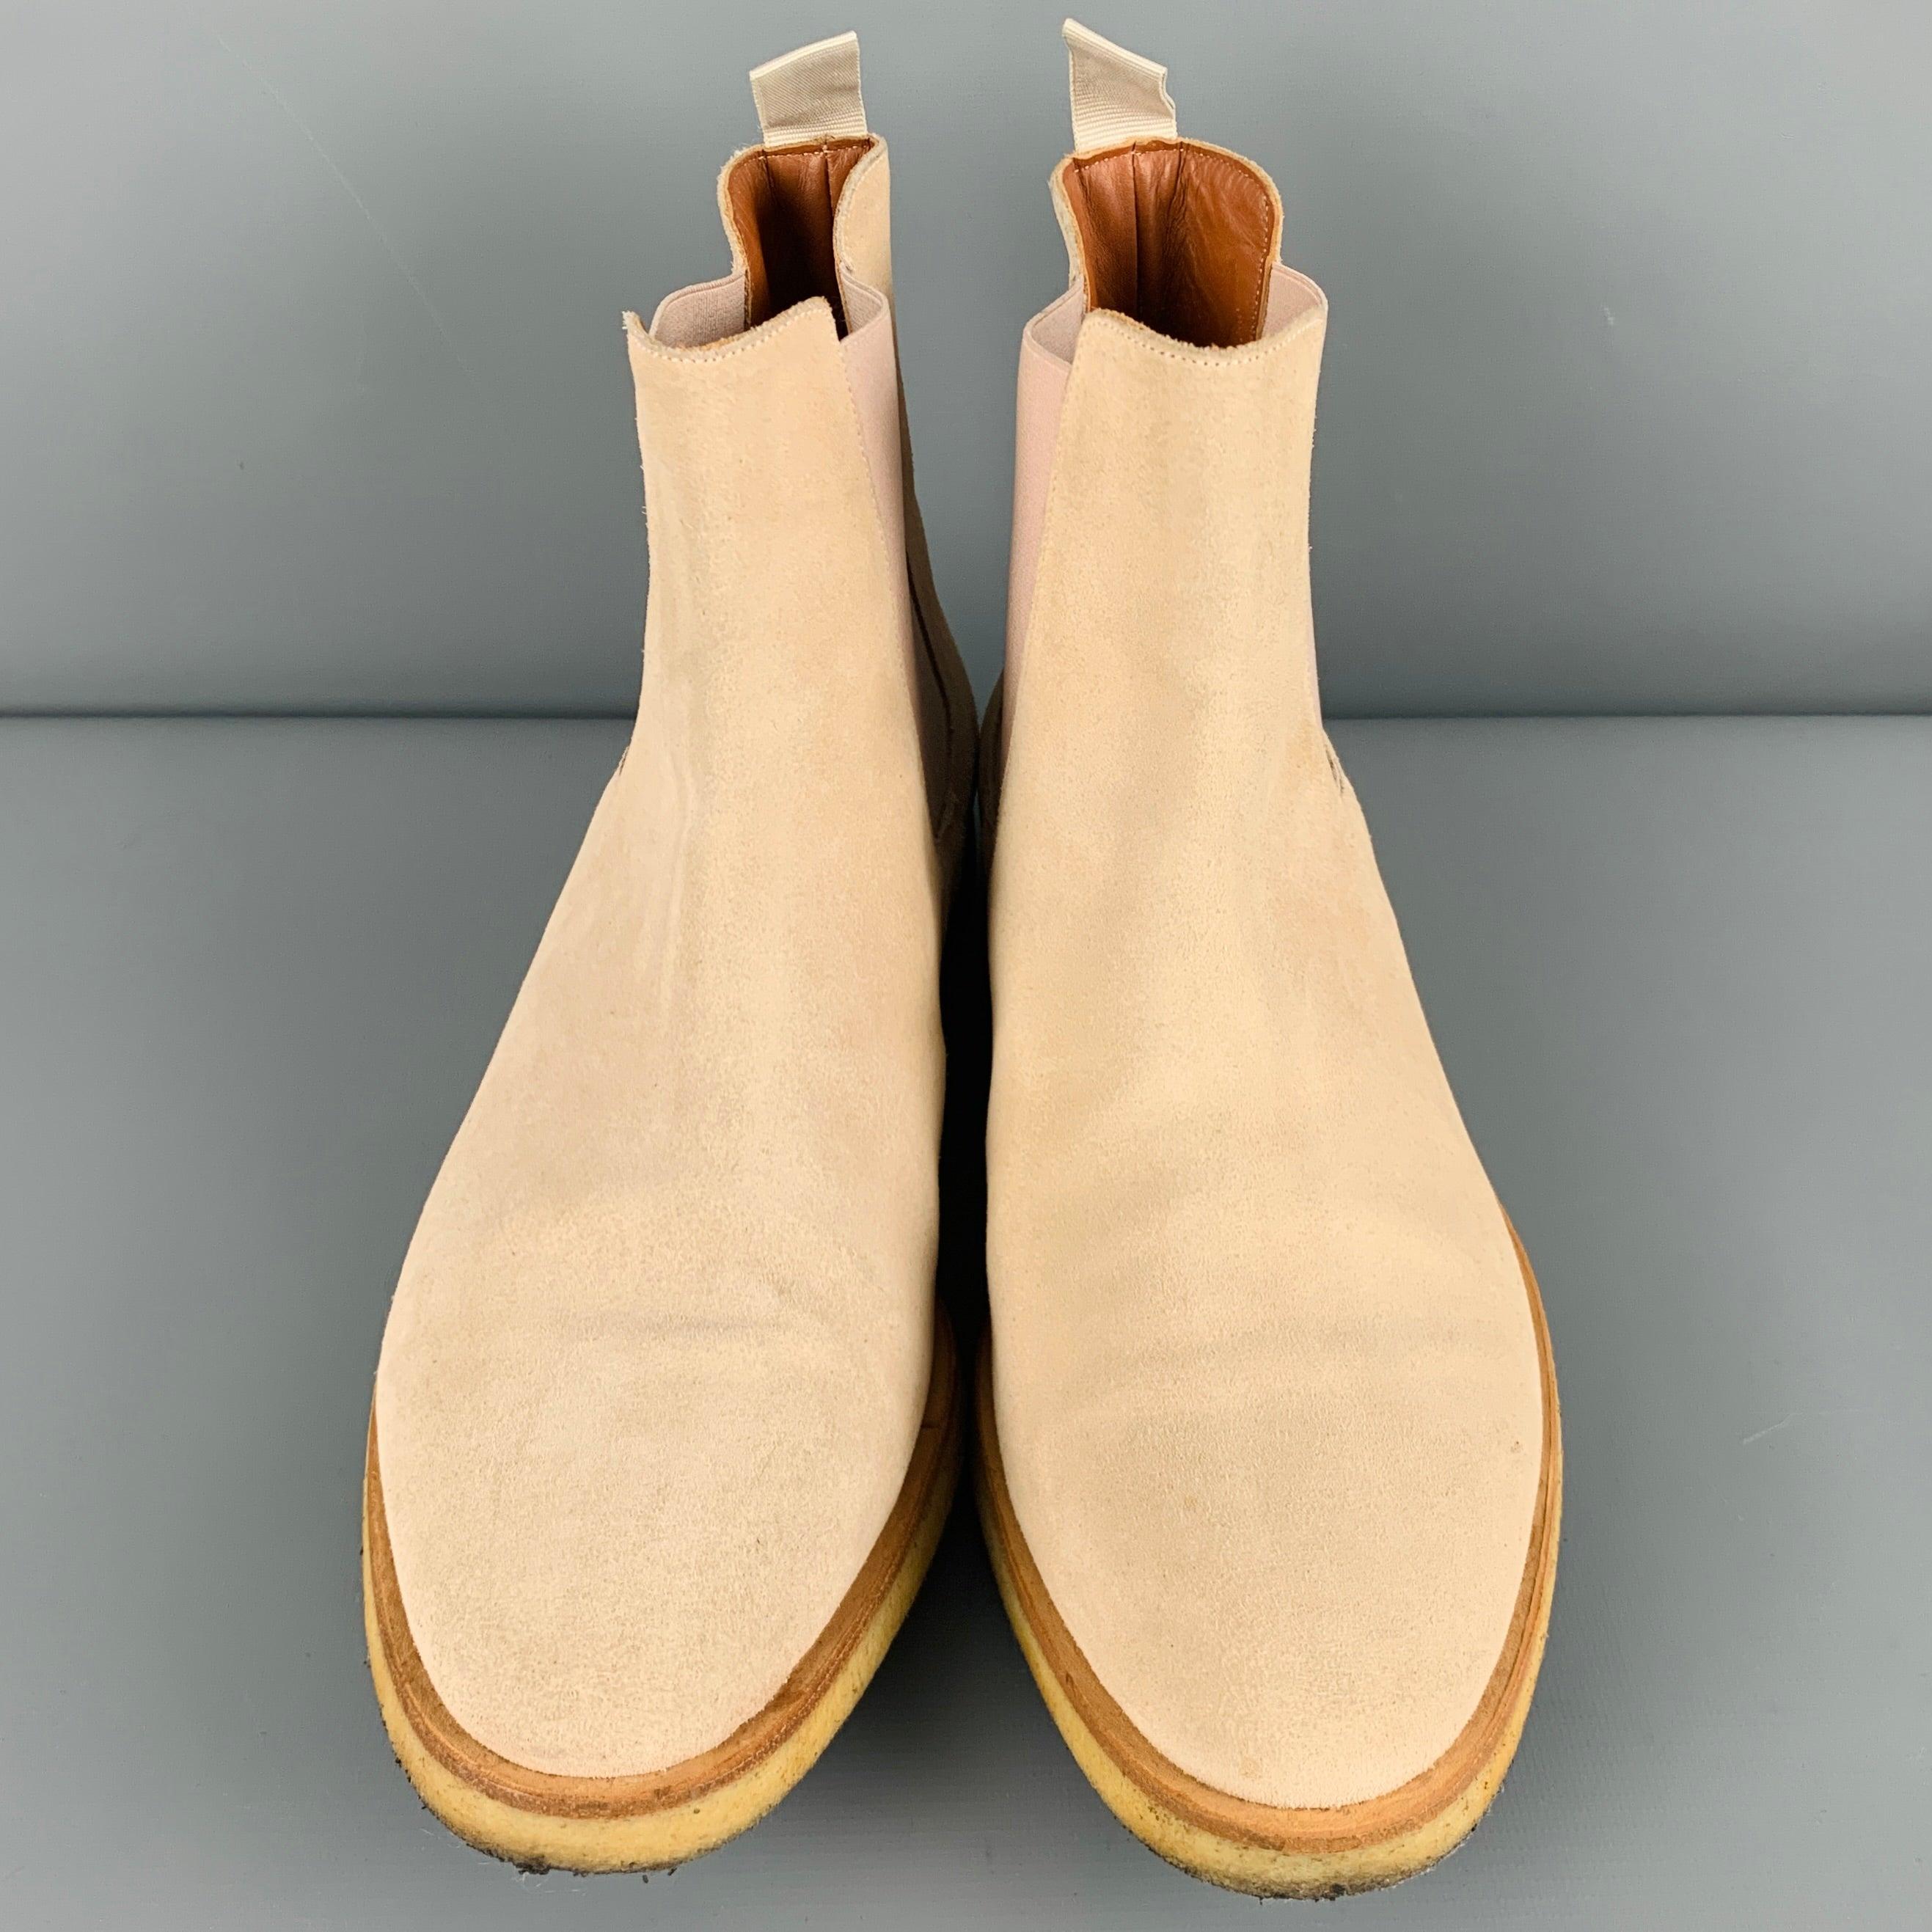 Men's COMMON PROJECTS Size 9 Beige Suede Chelsea Ankle Boots For Sale